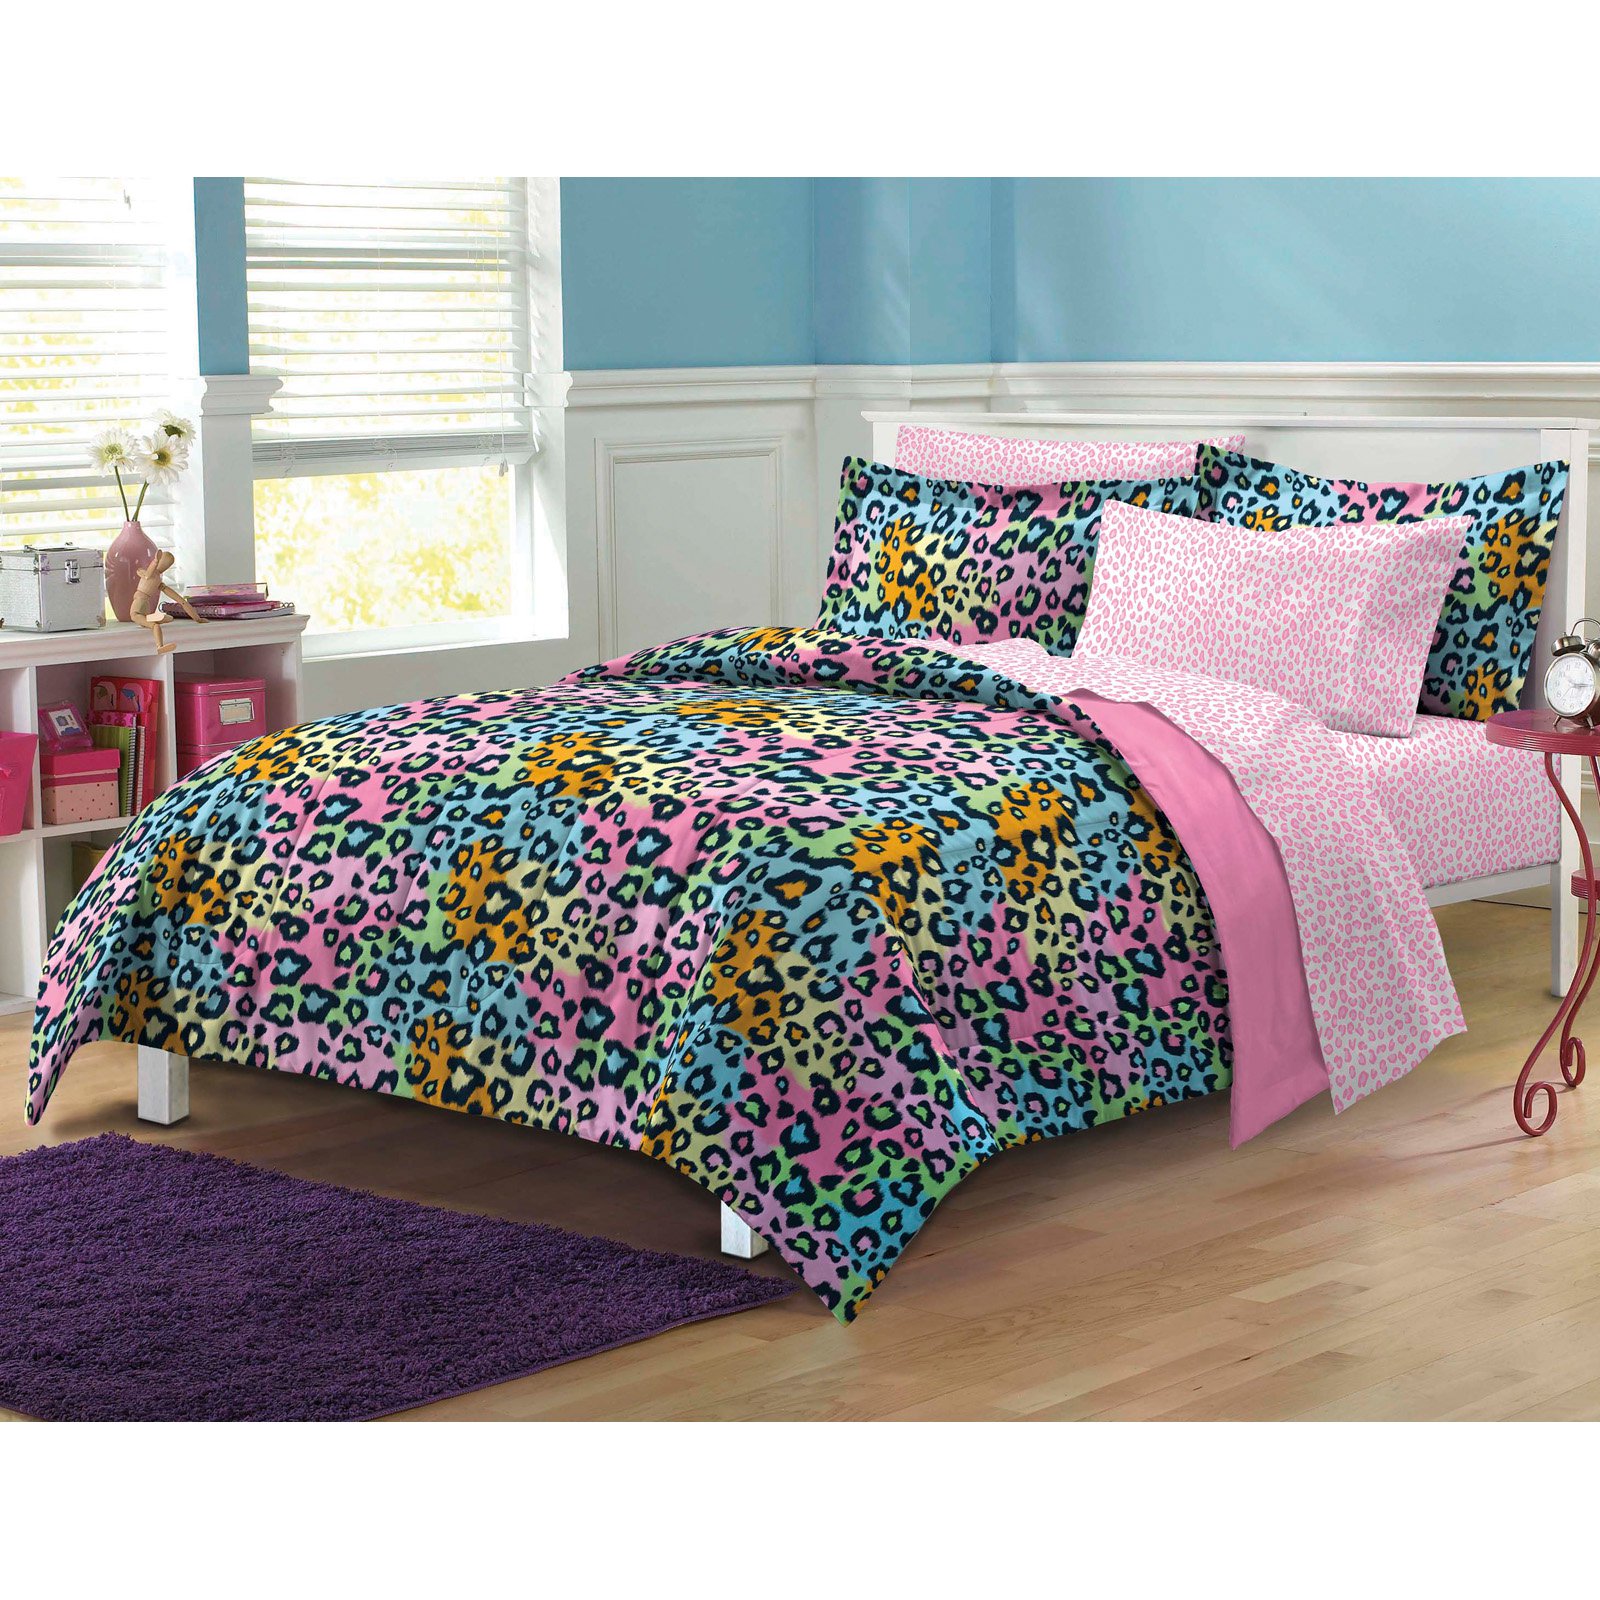 My Room Leopard Twin 5 Piece Bed in a Bag Bedding Set, Polyester, Pink, Sky Blue, Multi, Female, Child - image 1 of 4